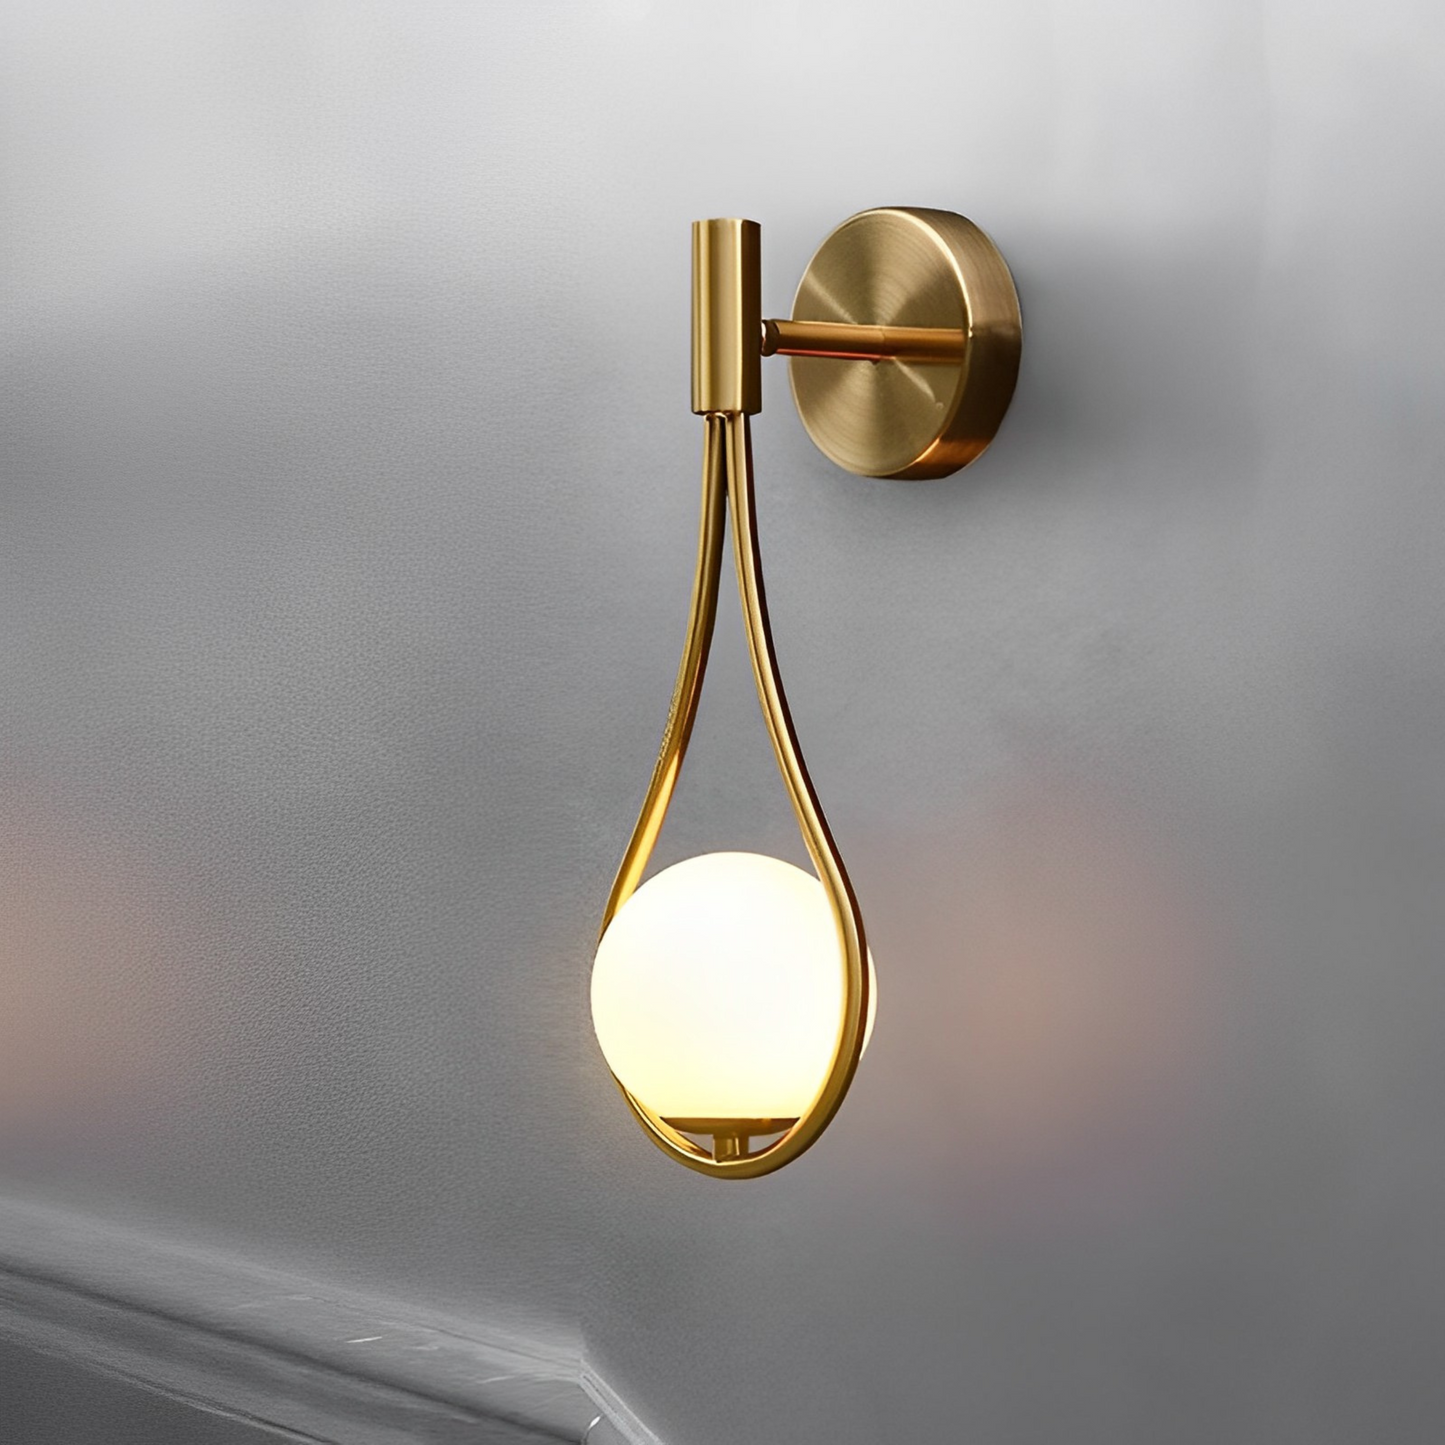 Nordic Metal Glass LED Wall Sconce Lighting Modern E14 Wall Mounted Light Fixture Brass White Lamp Creative Staircase Bedside Lamp, bedroom, Corridor, Hallway by Gloss (WL-B0035)